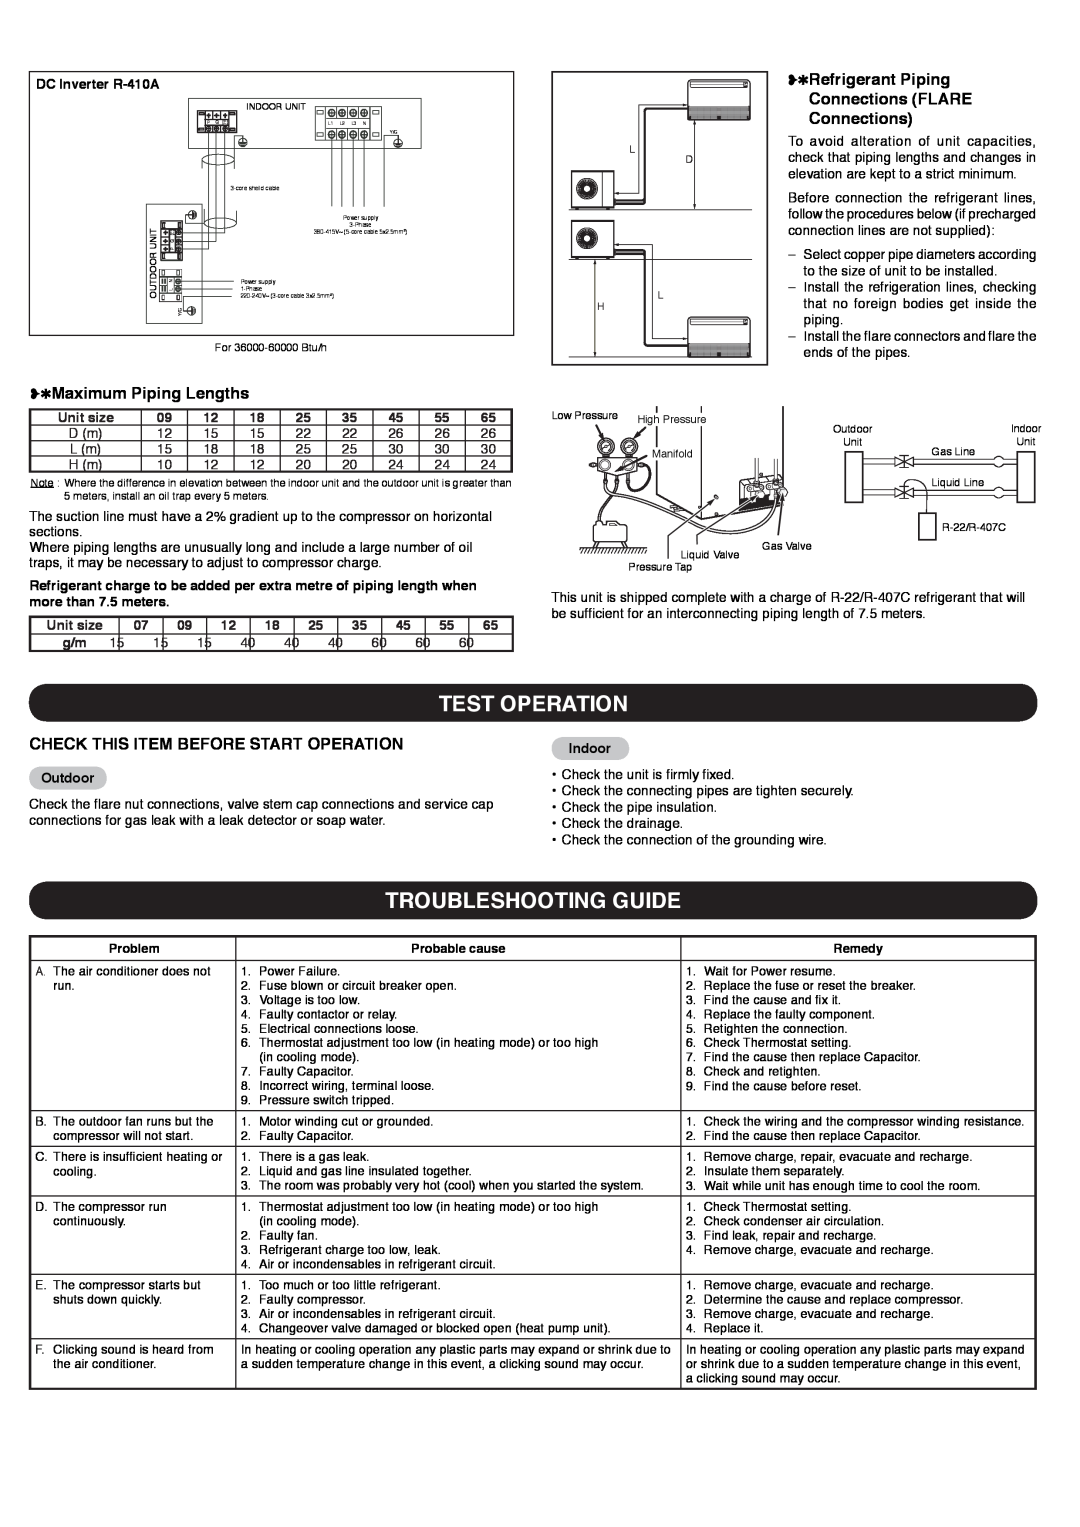 York YOCC-YOHC 12-60 Test Operation, Troubleshooting Guide, Maximum Piping Lengths, Check This Item Before Start Operation 